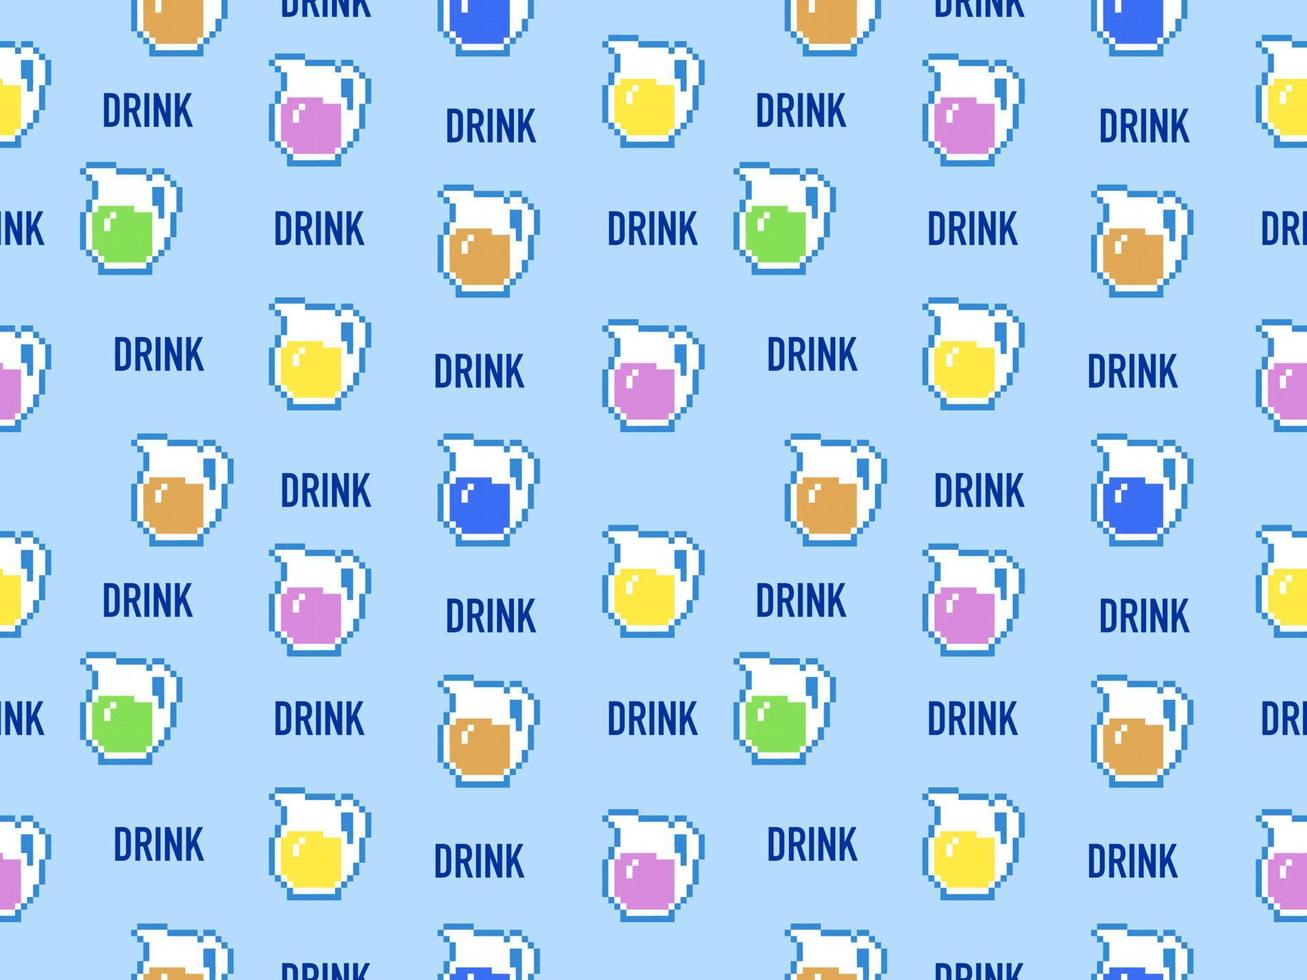 Water jug cartoon character seamless pattern on blue background.Pixel style vector